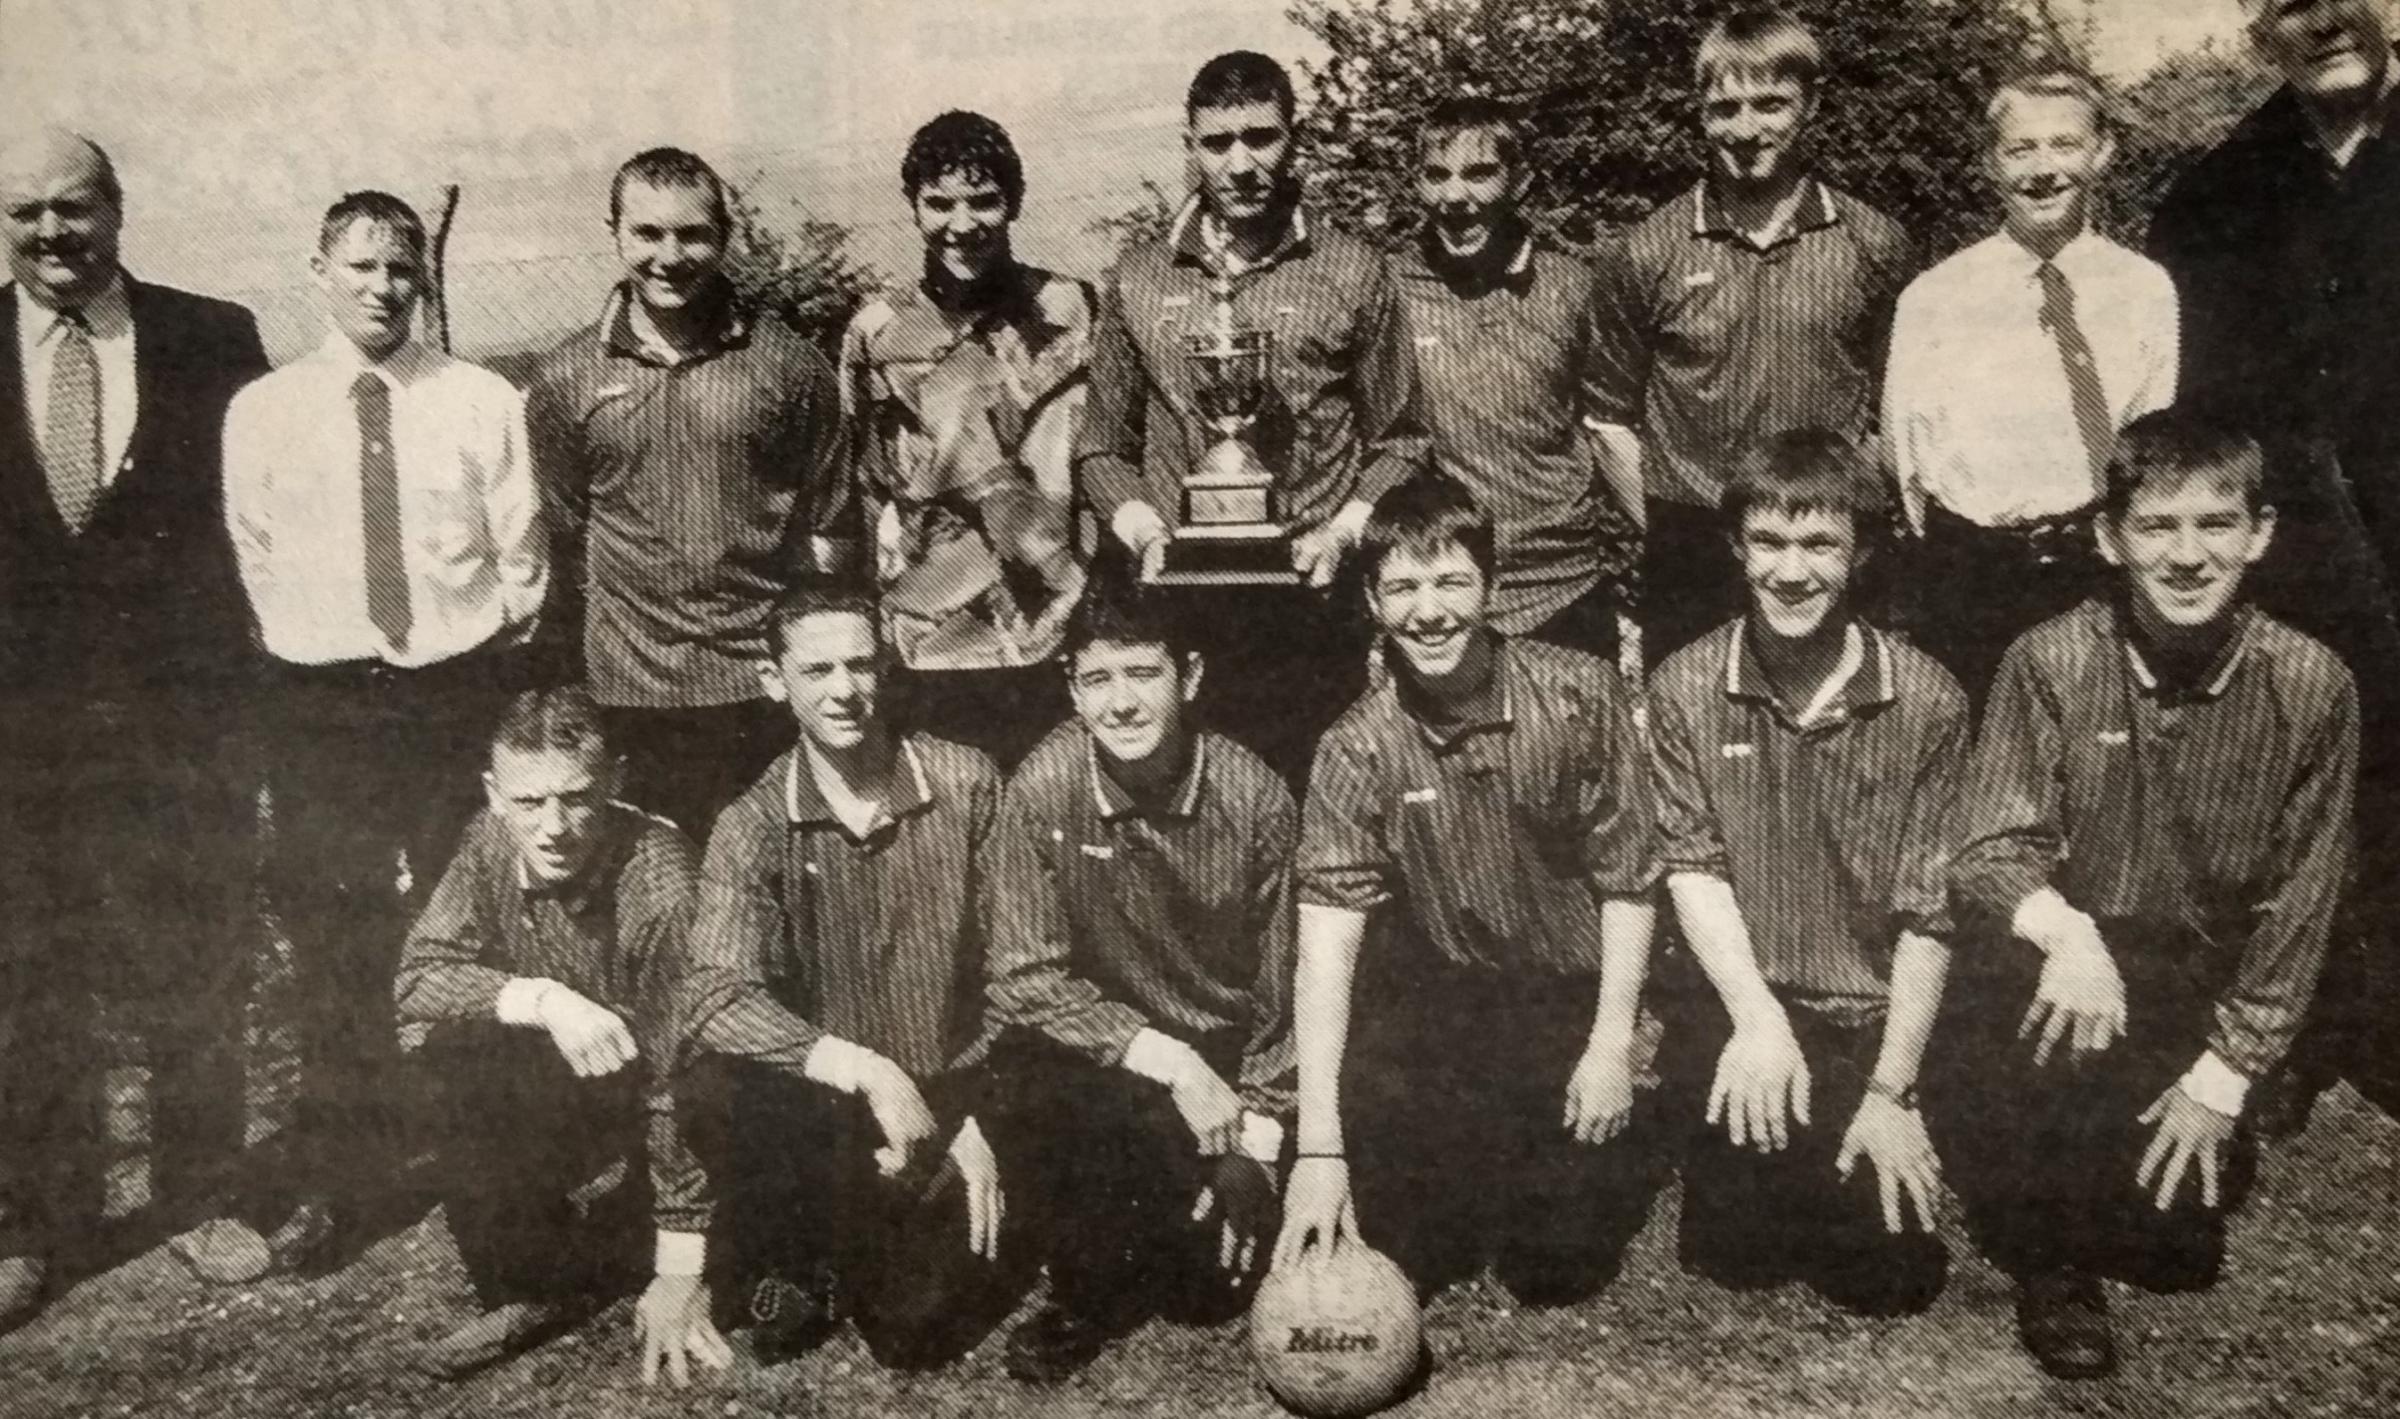 Price Cup winners again in May 1997 were the schools Under-16s team